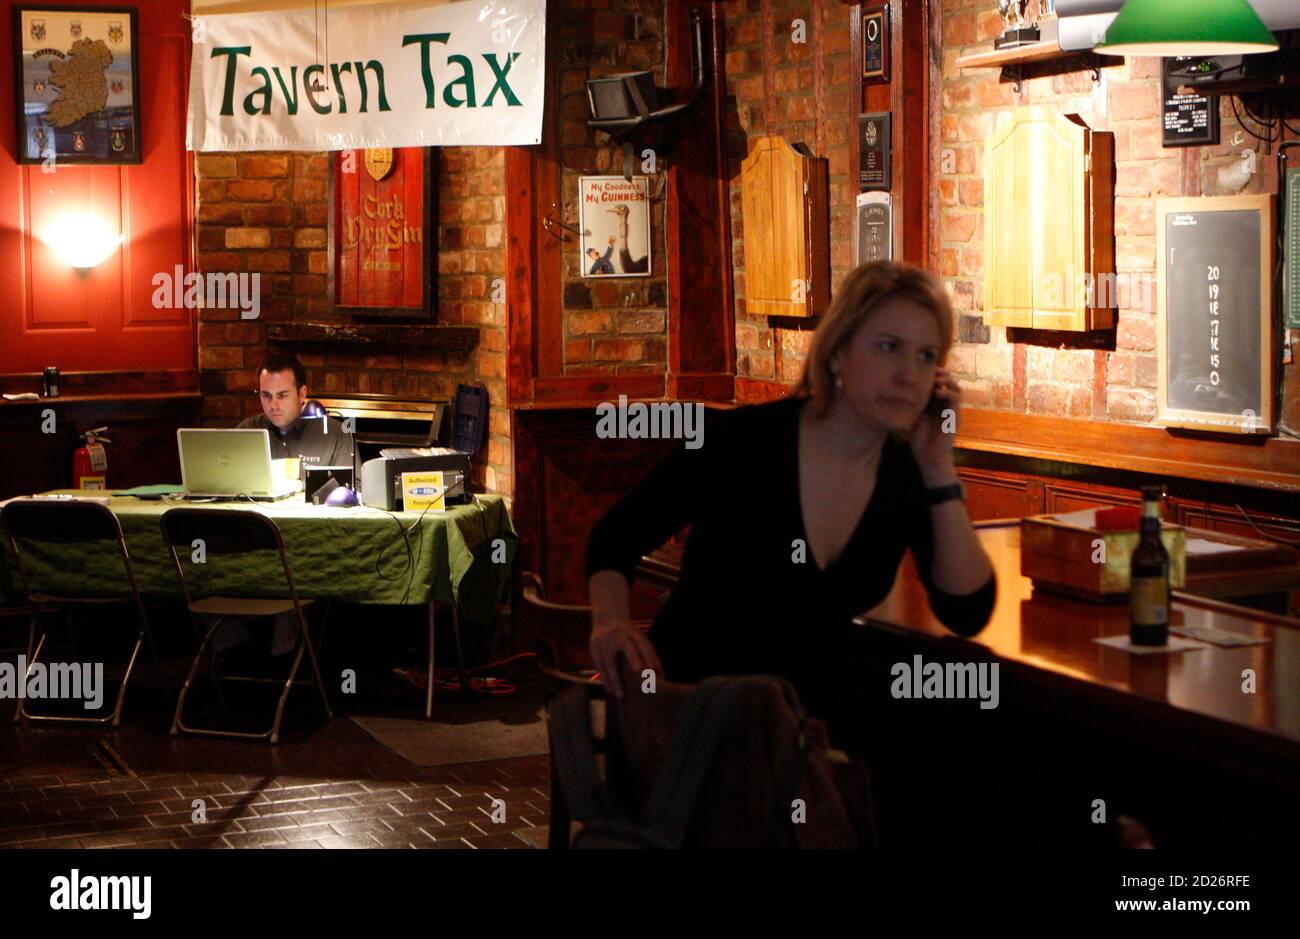 Carmine Sodora of Tavern Tax waits for his clients to arrive at his  makeshift income tax office as a woman sits at the bar at Duffy's tavern in  Hoboken, New Jersey April